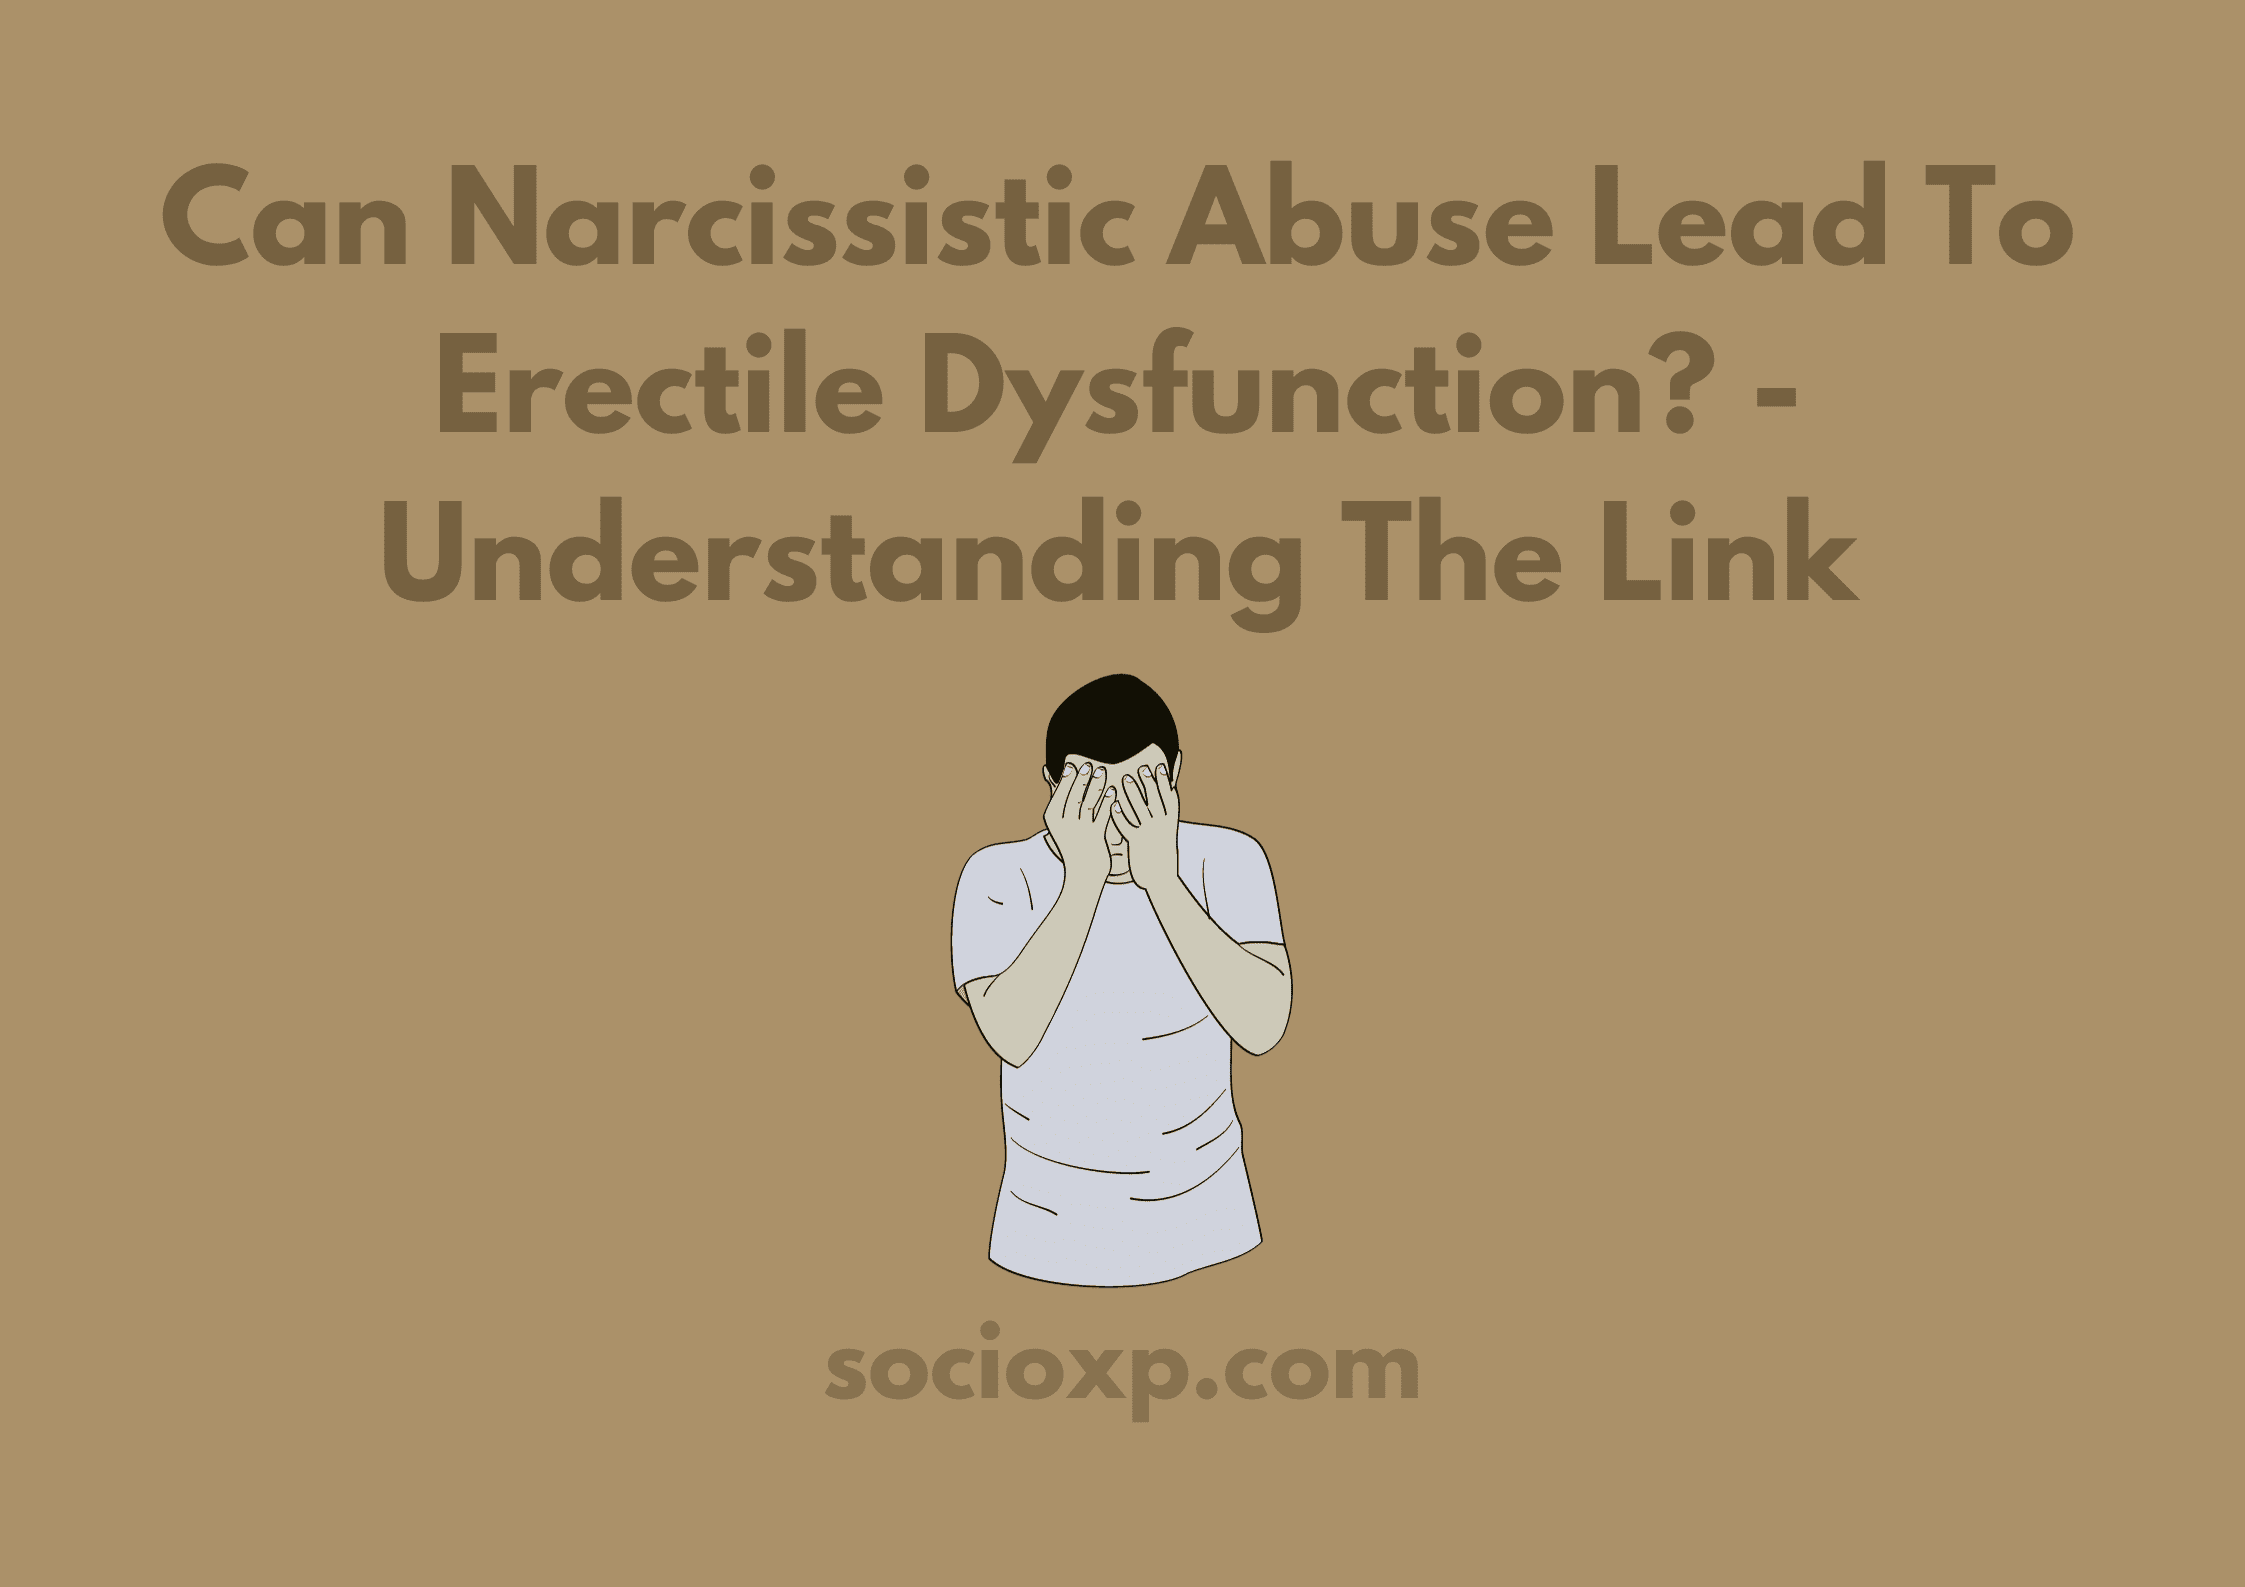 Can Narcissistic Abuse Lead To Erectile Dysfunction? - Understanding The Link